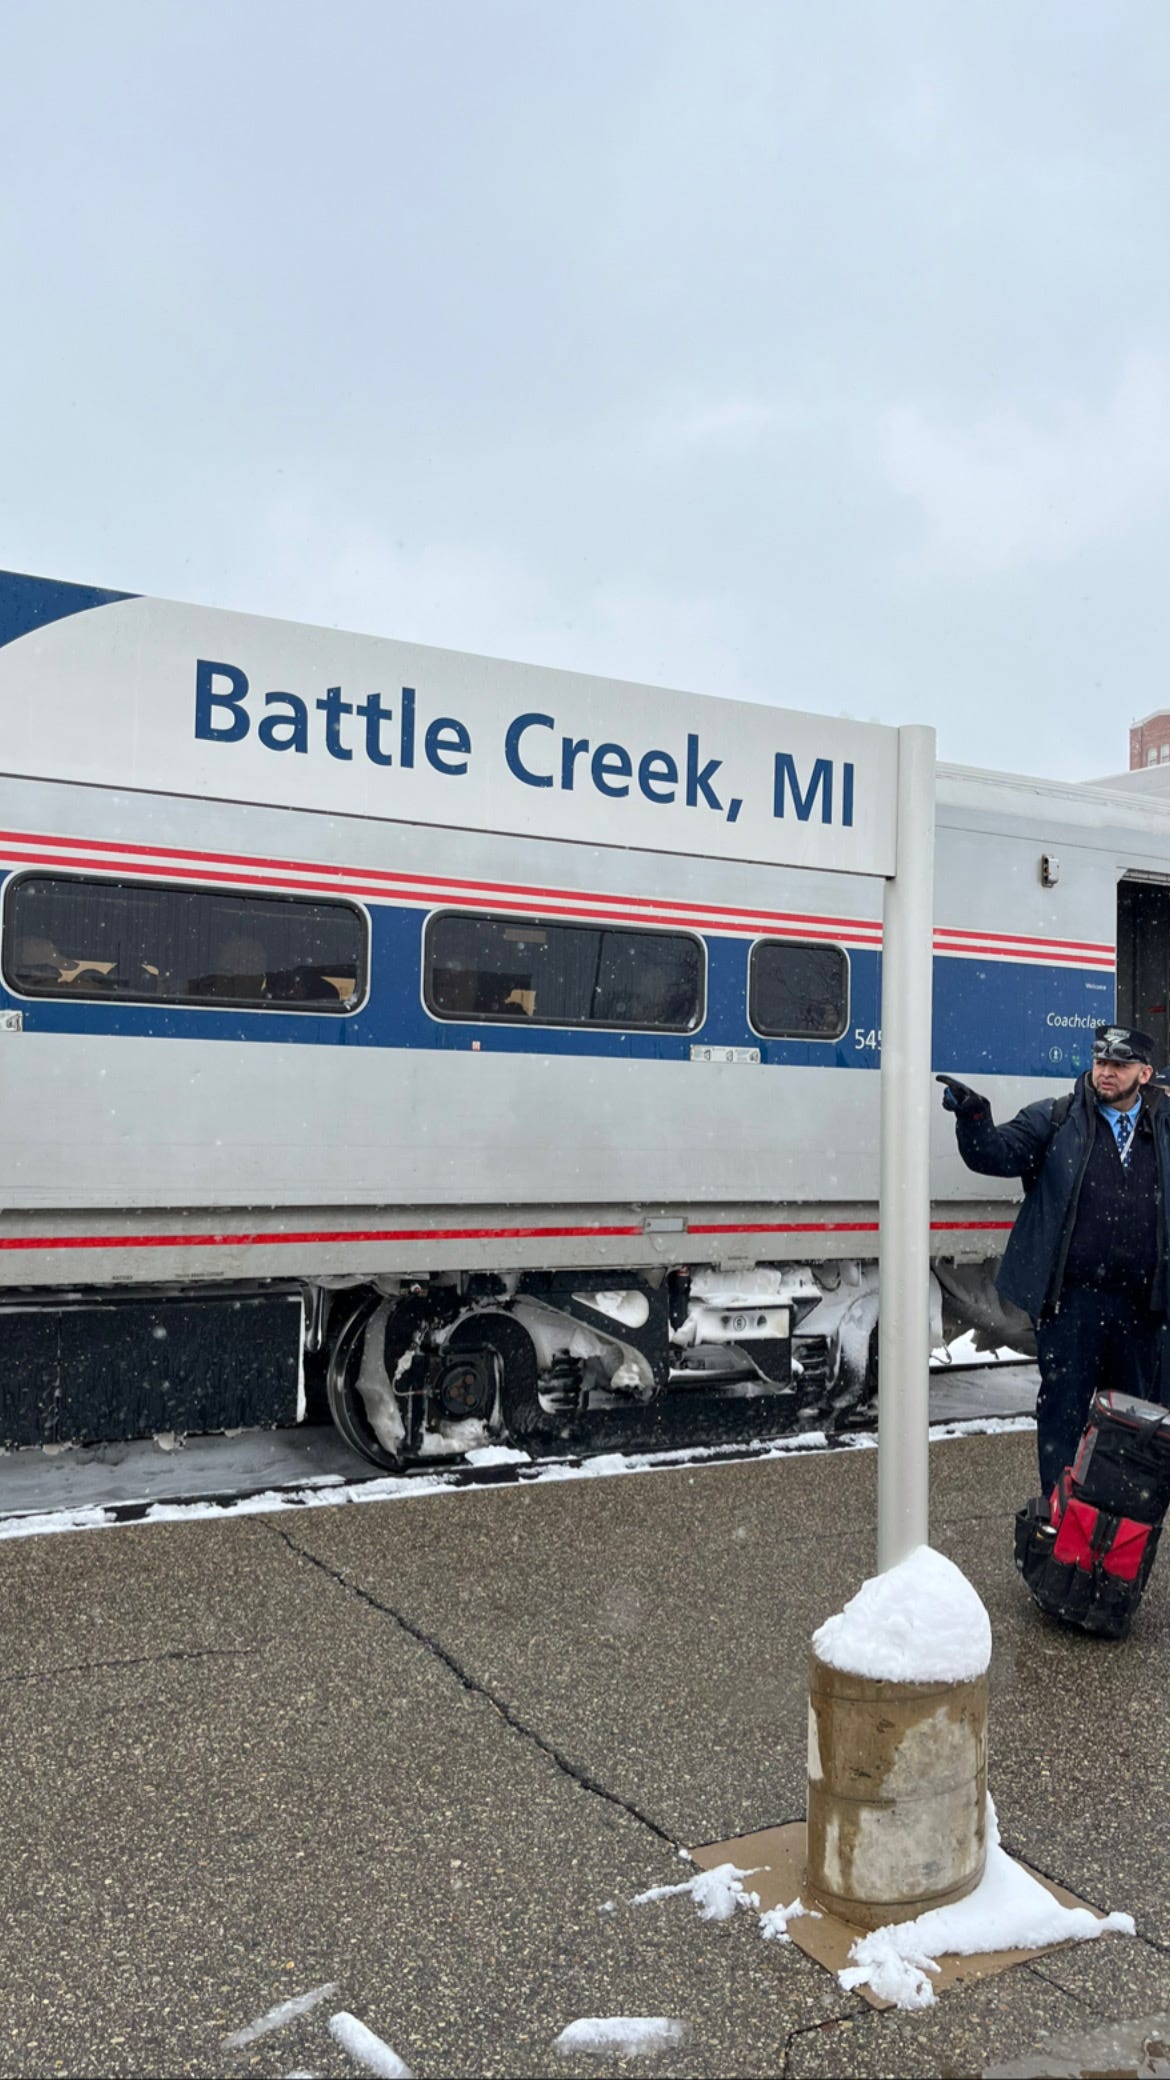 Train conductor stands in front of Amtrak Train stopped at the Battle Creek, Michigan station